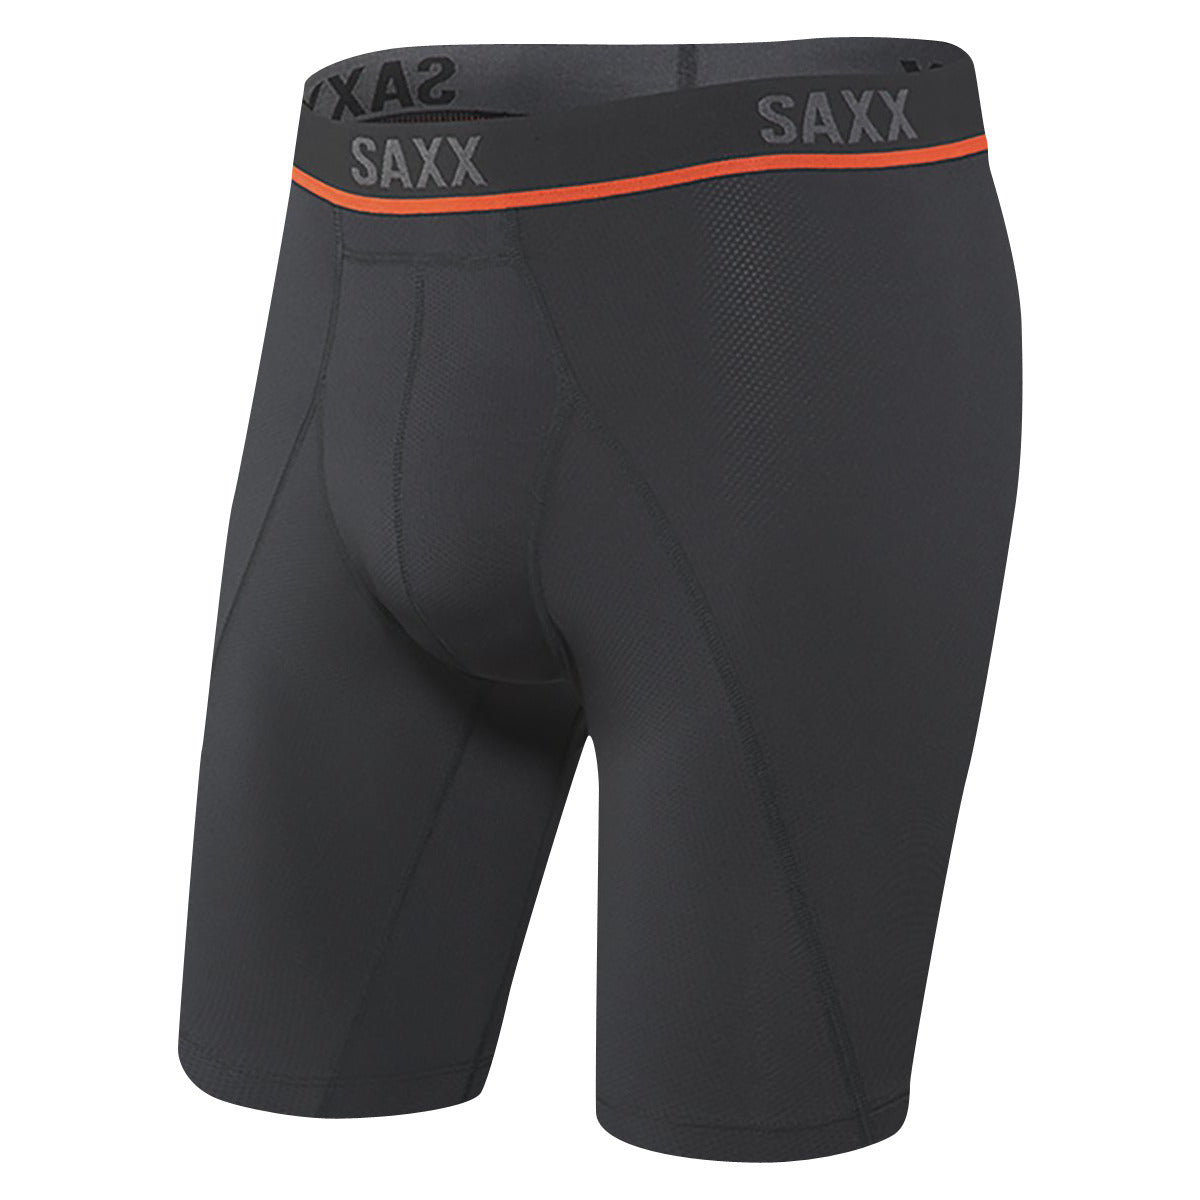 SAXX Kinetic HD Long Boxer Brief in  by GOHUNT | SAXX - GOHUNT Shop